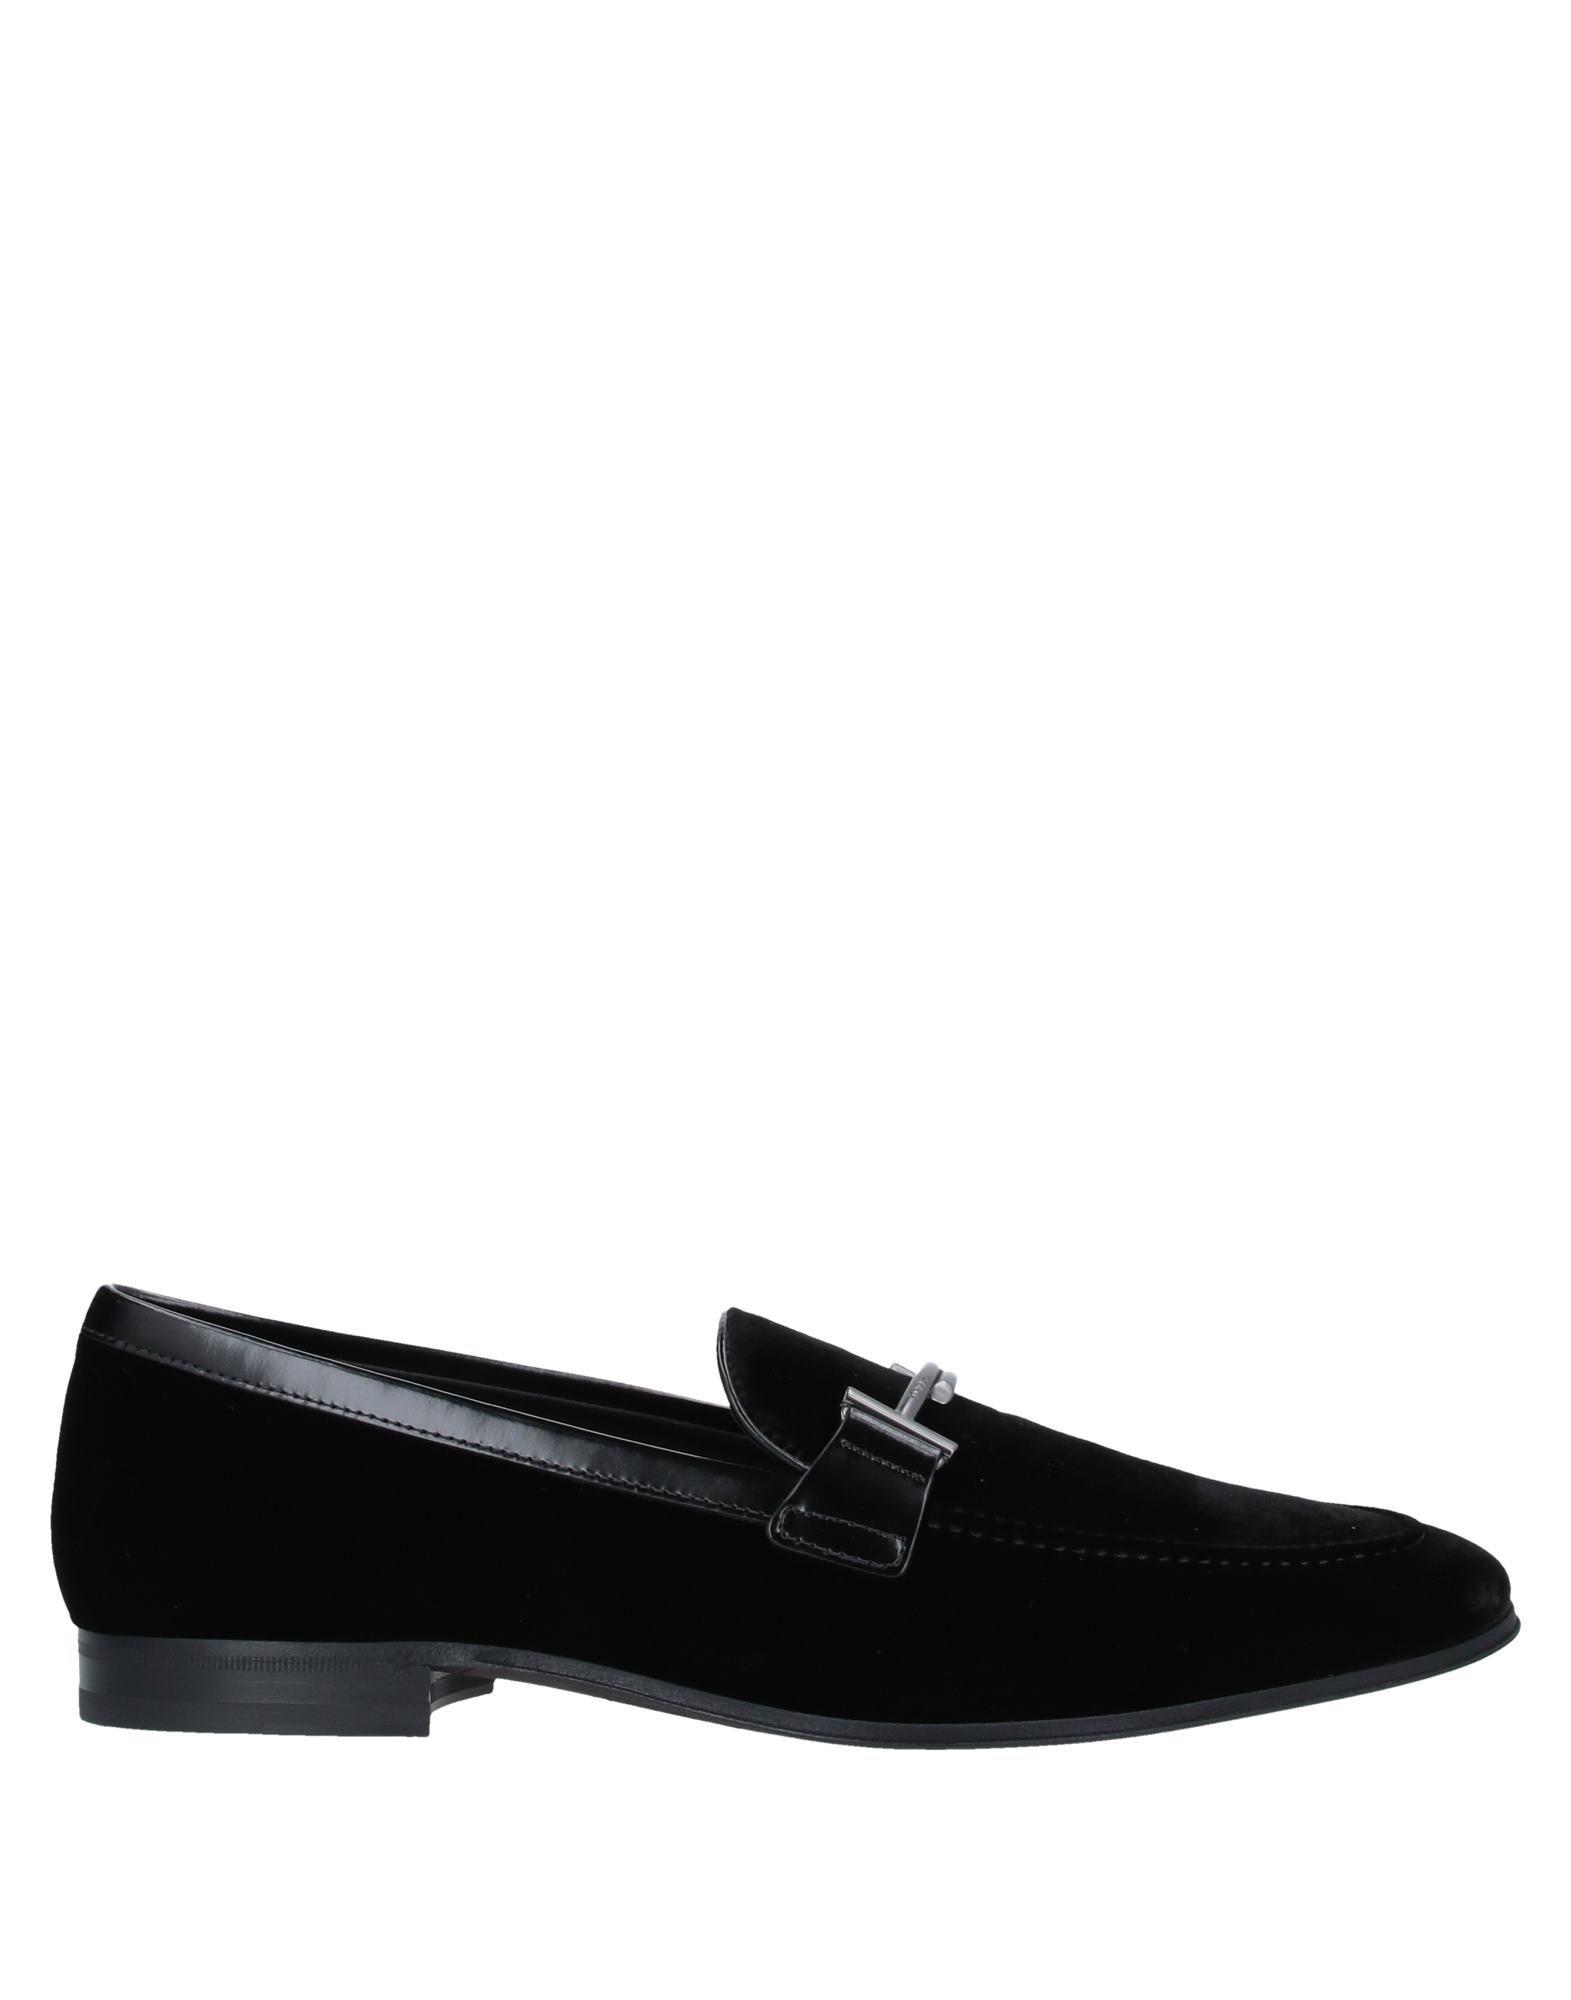 Tod's Leather Loafer in Black for Men - Lyst